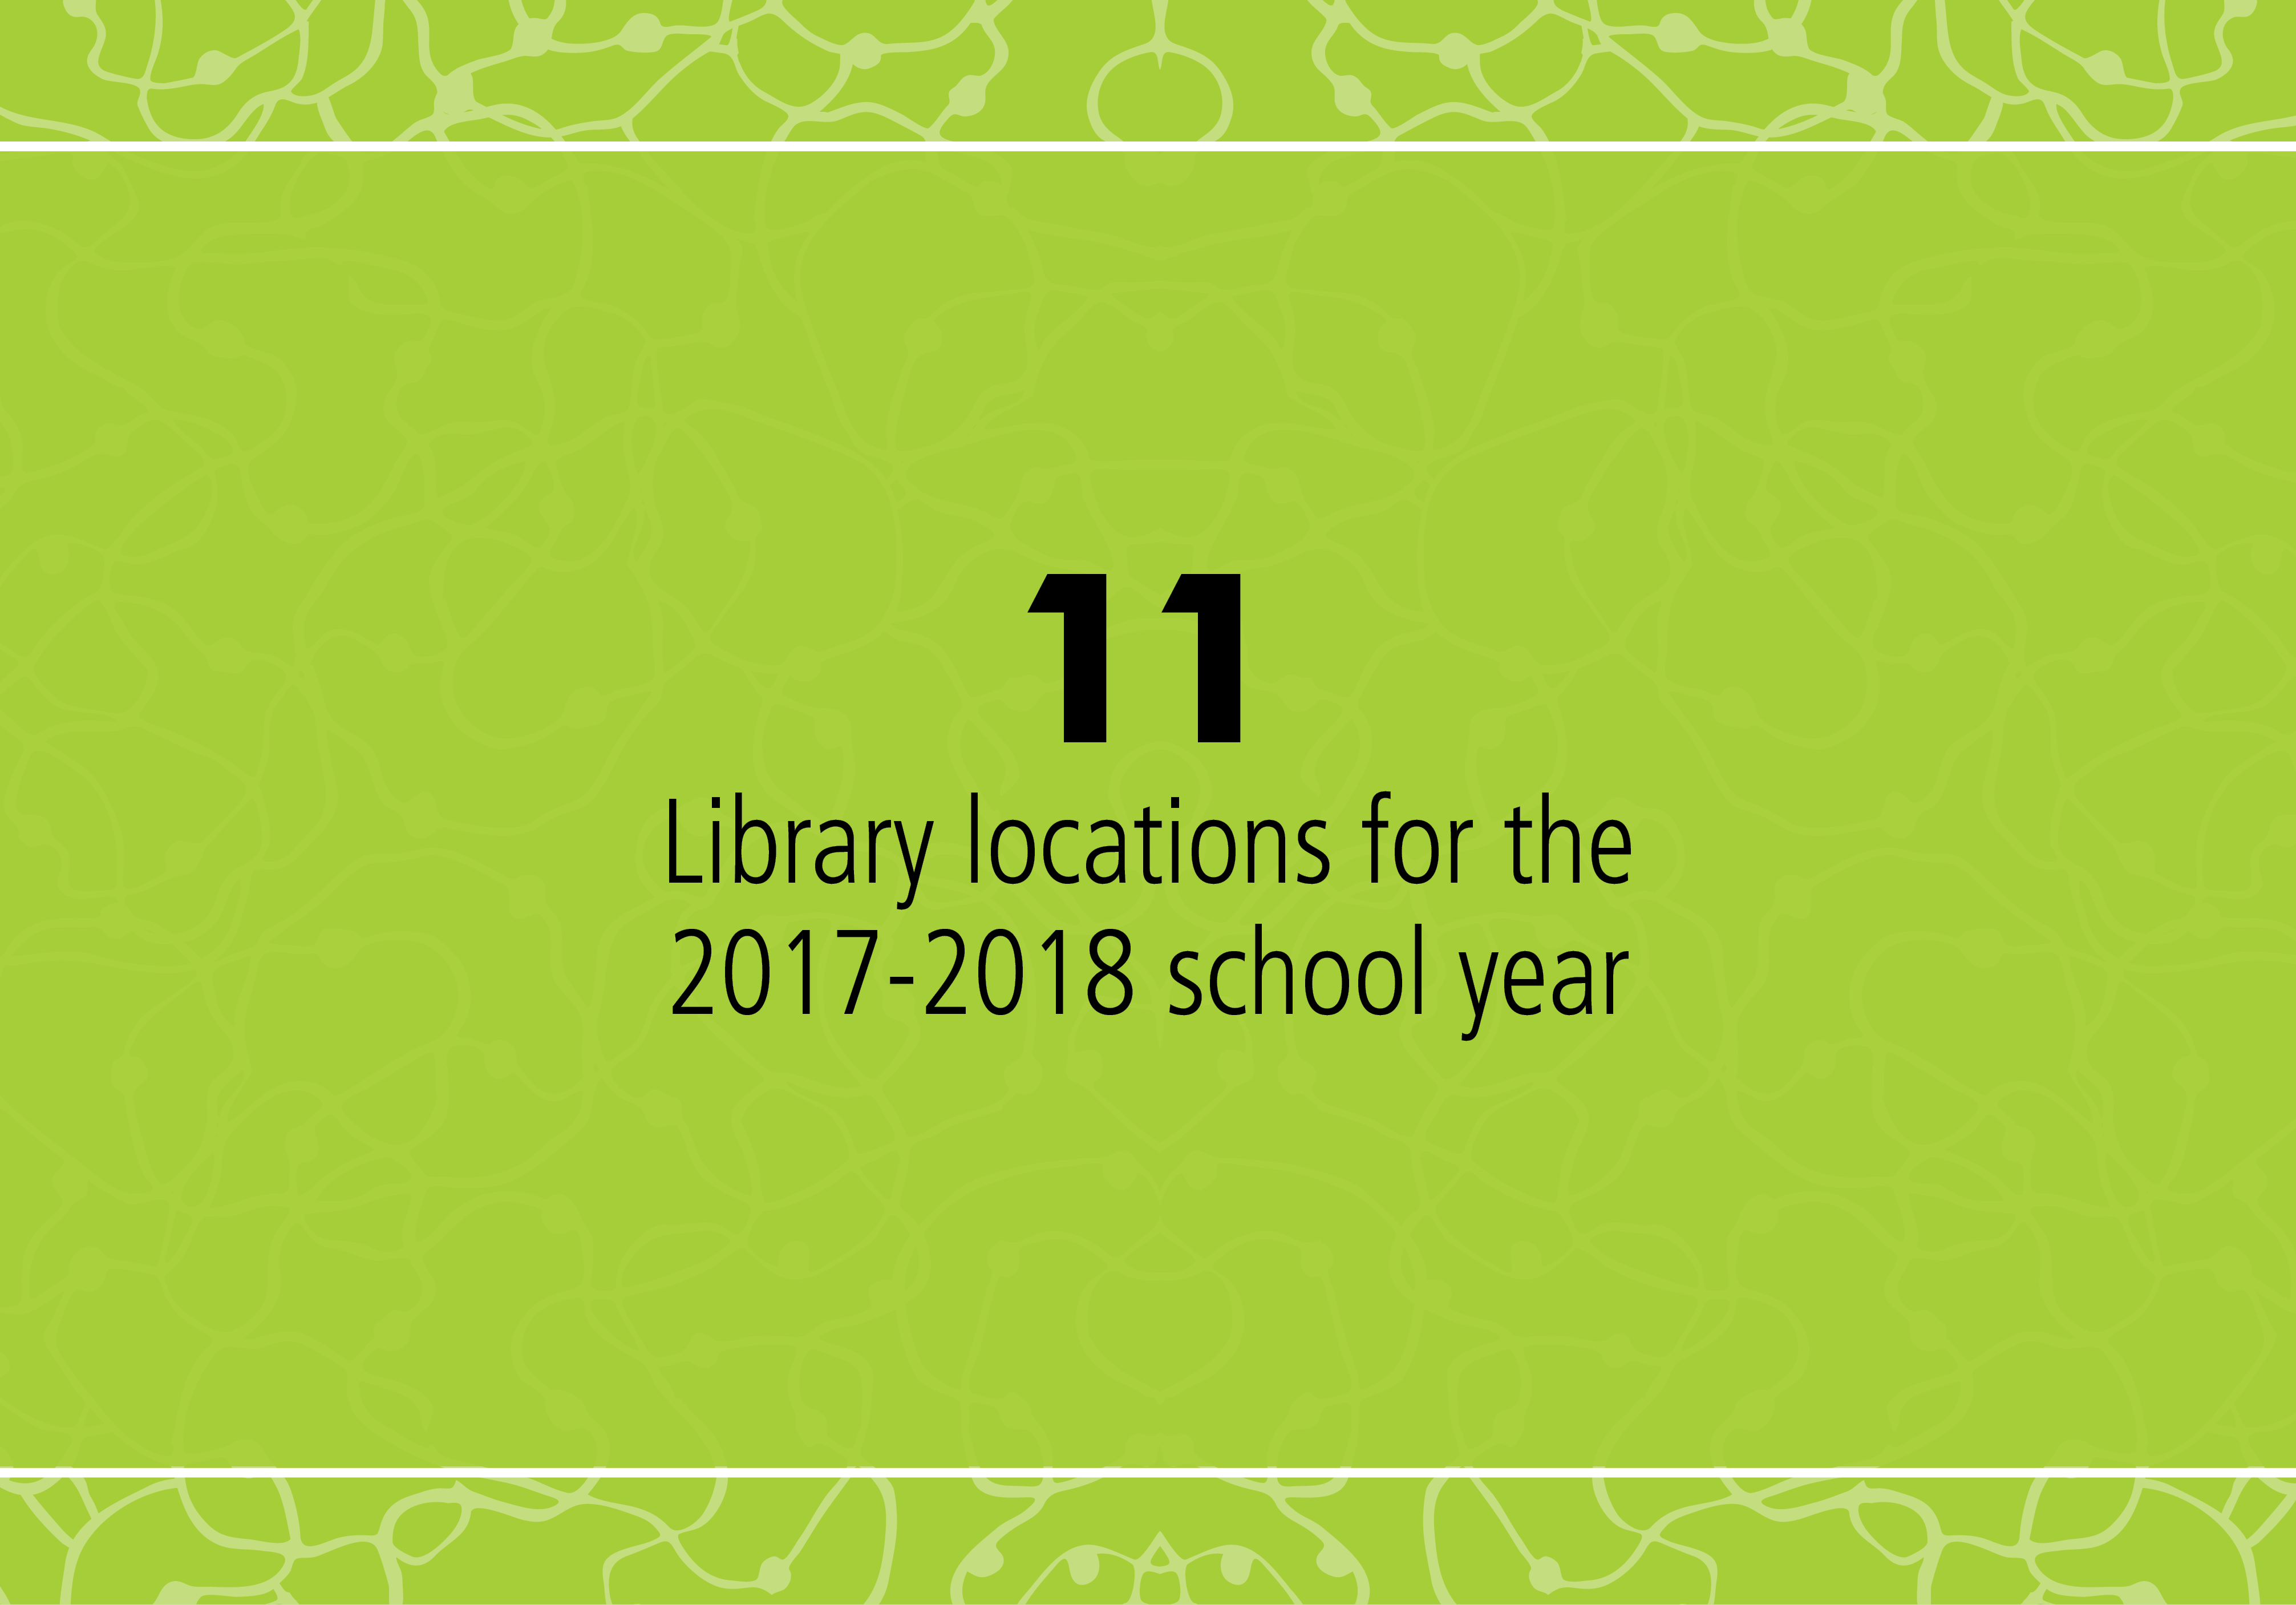 11 Library locations for the 2017-2018 school year